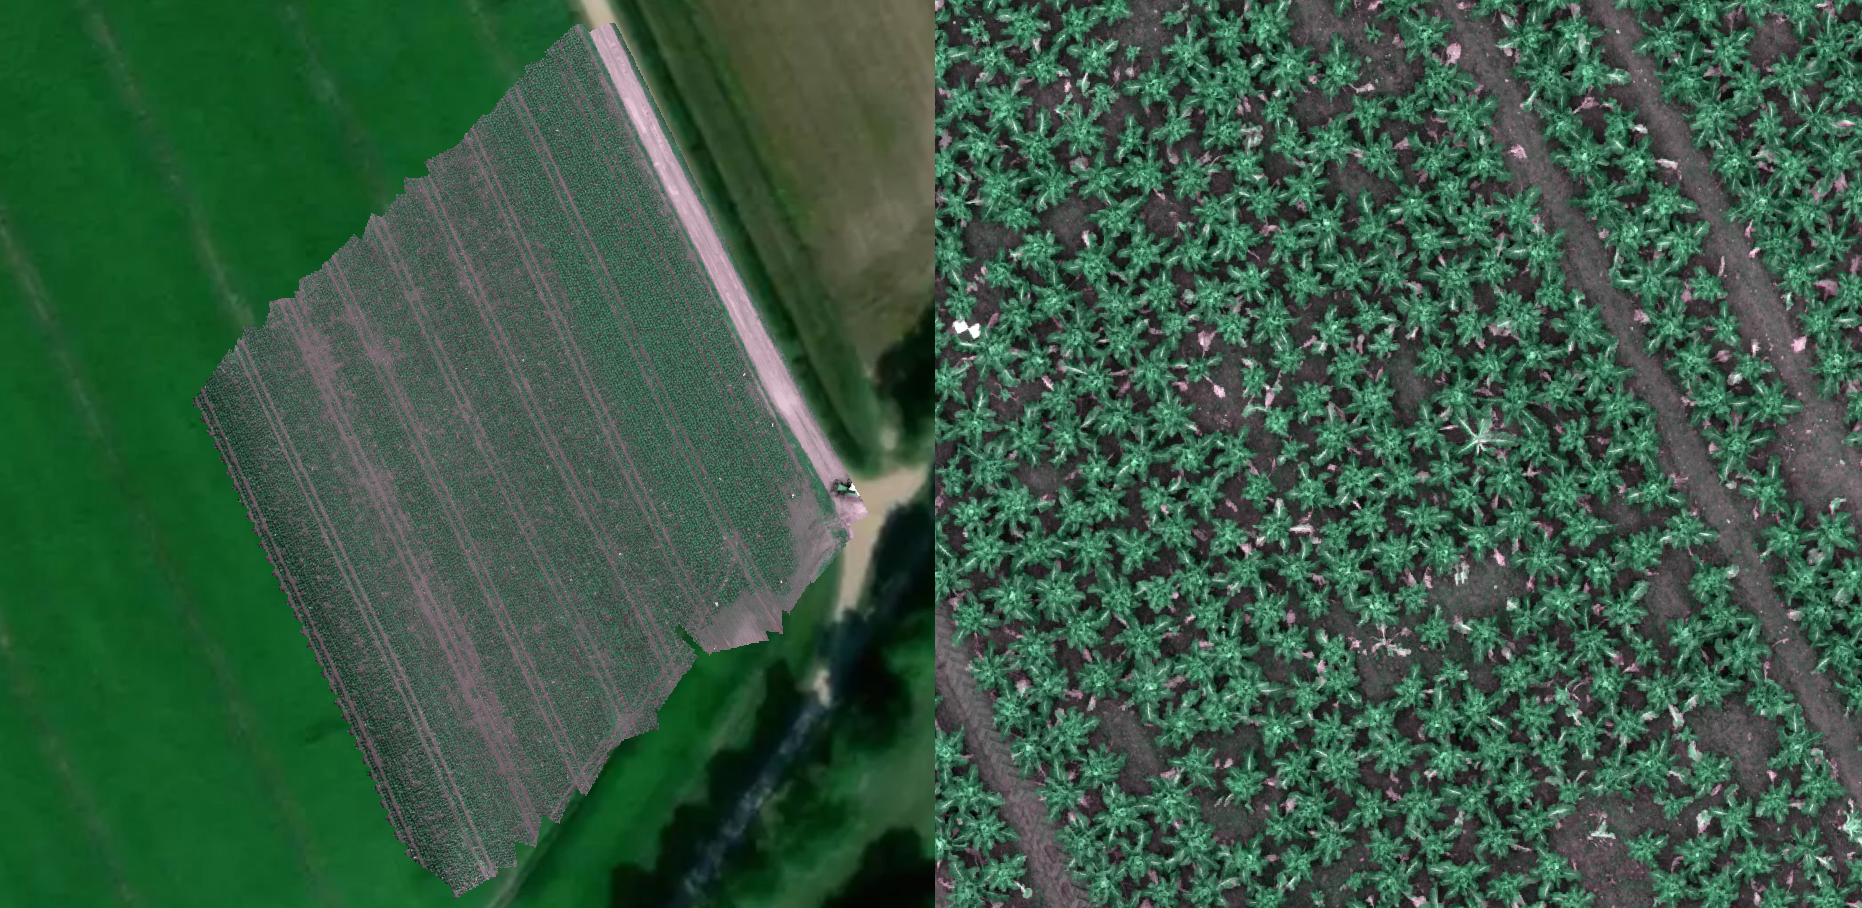 Two panel image showing an orthomosaic of a cauliflower field stitched together and a zoomed in image where the highly resolved cauliflower plants can be seen